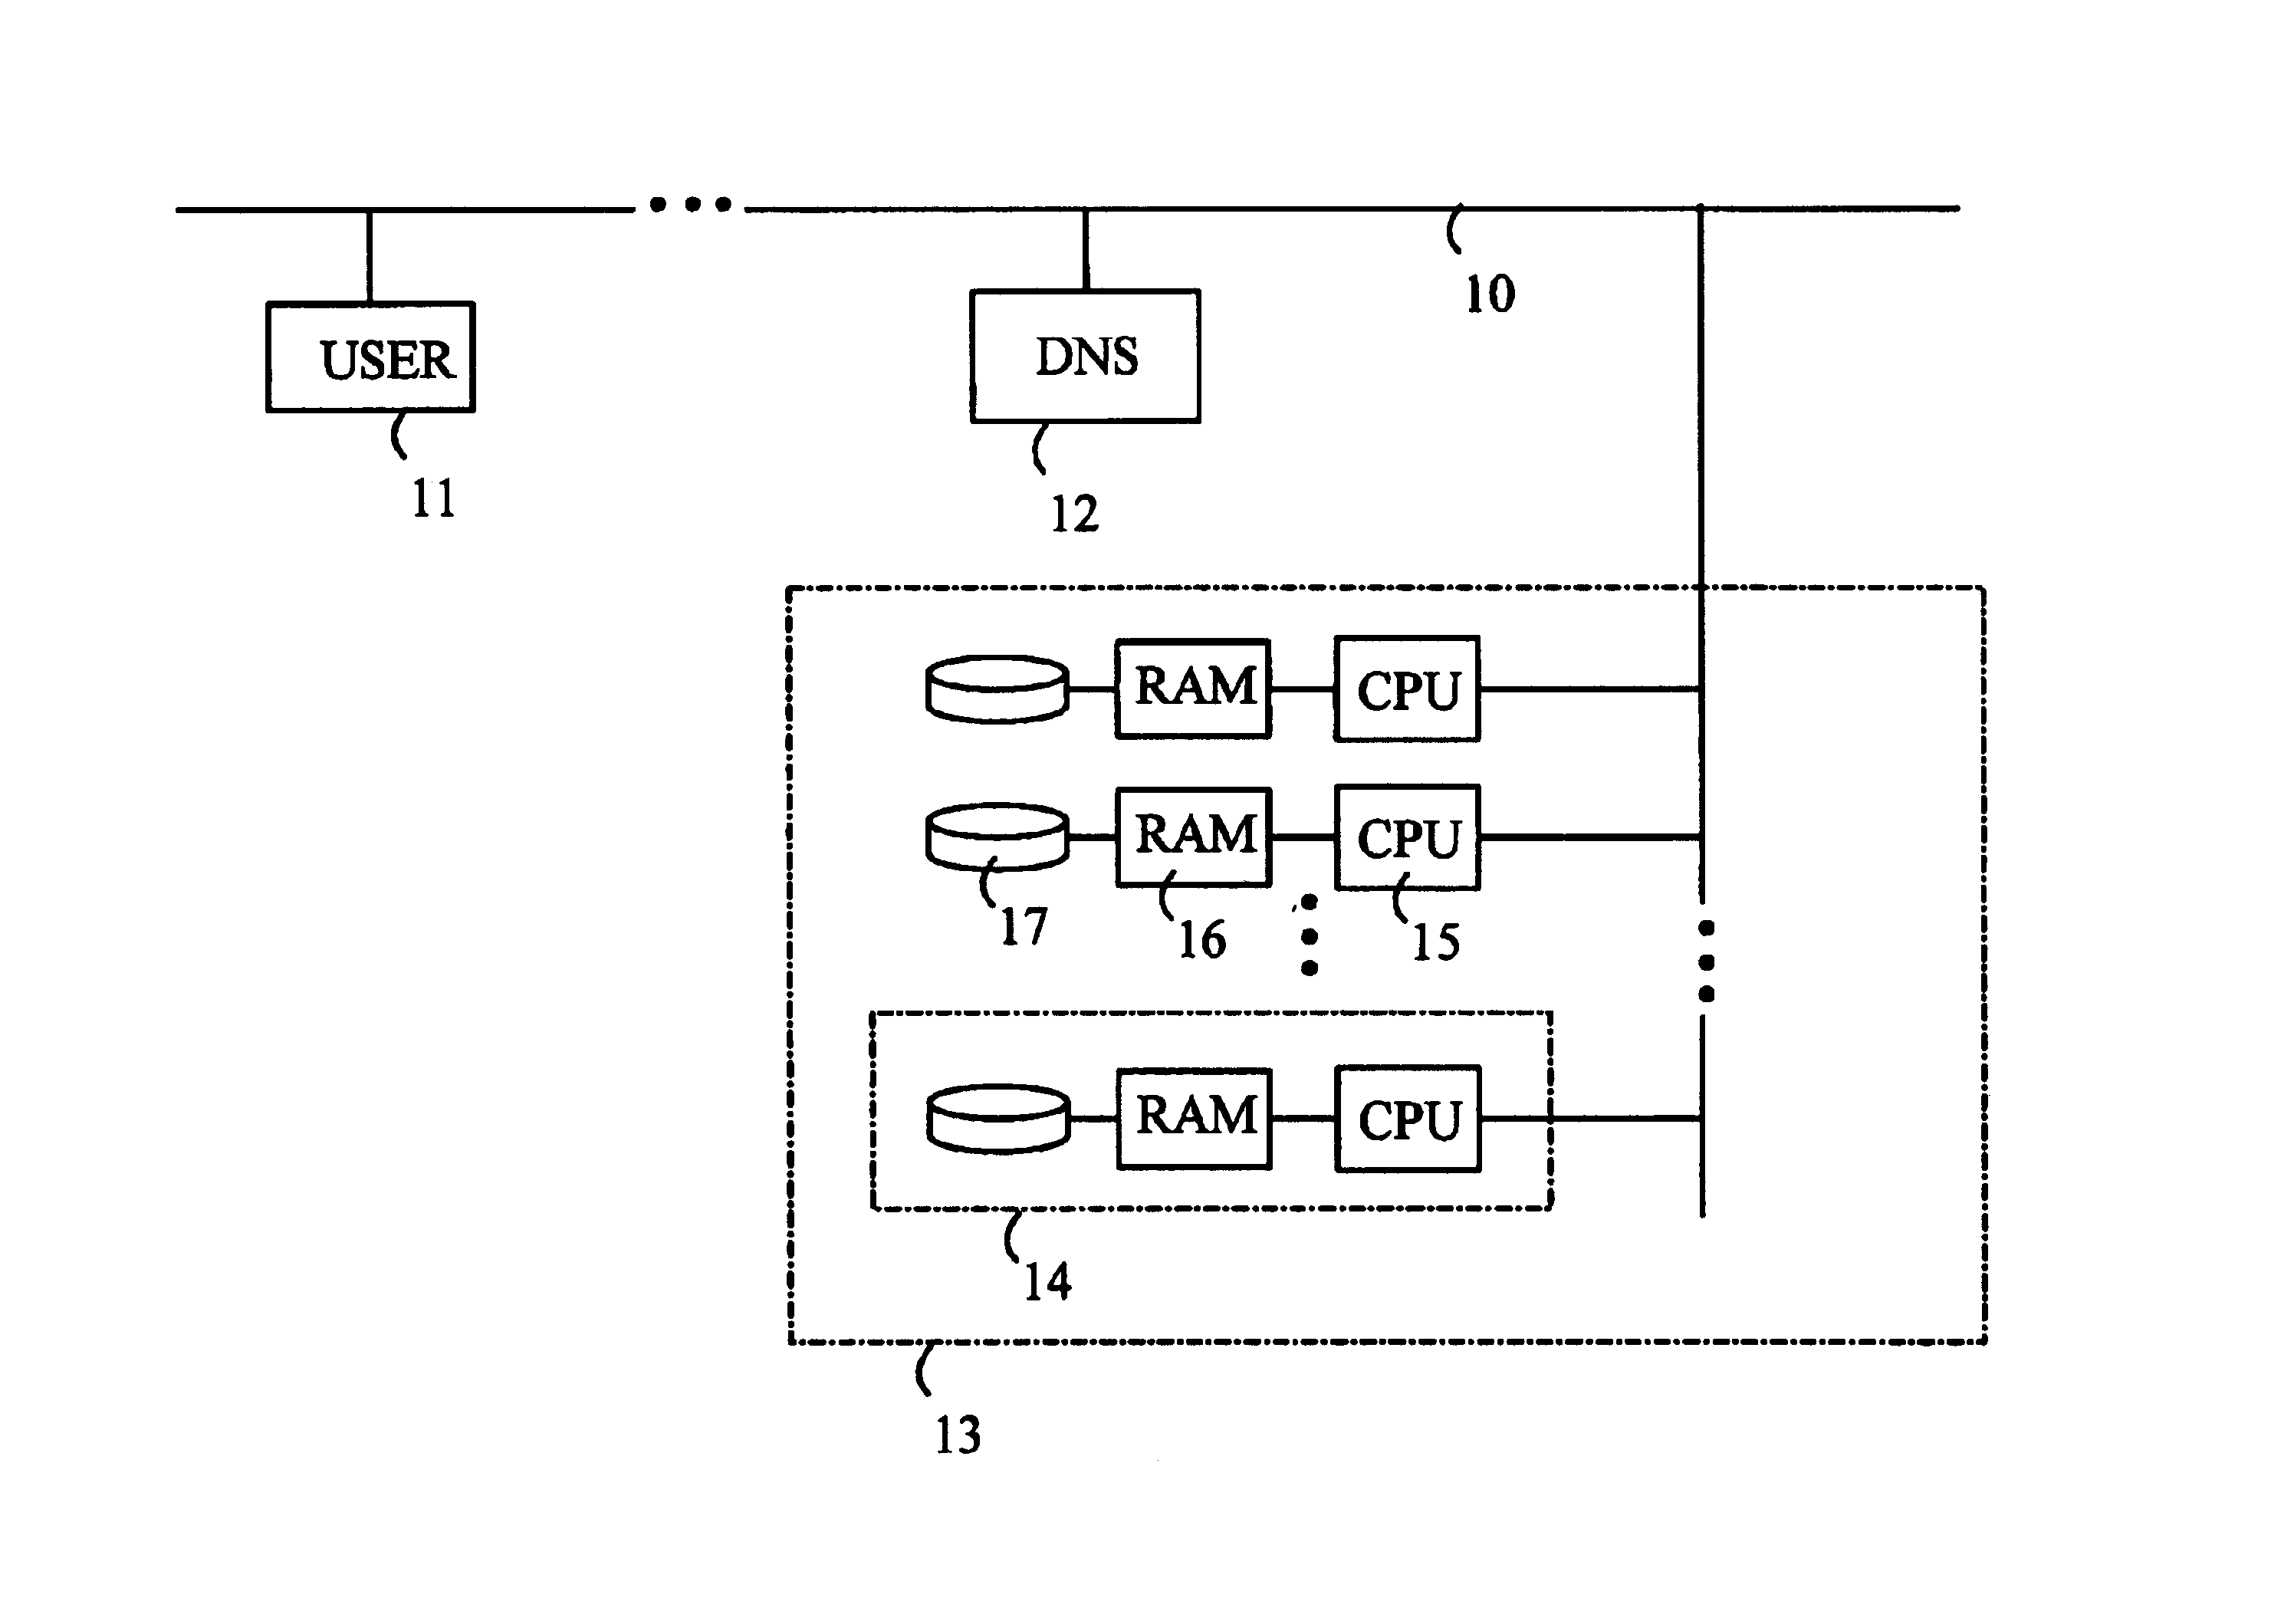 Method for allocating web sites on a web server cluster based on balancing memory and load requirements